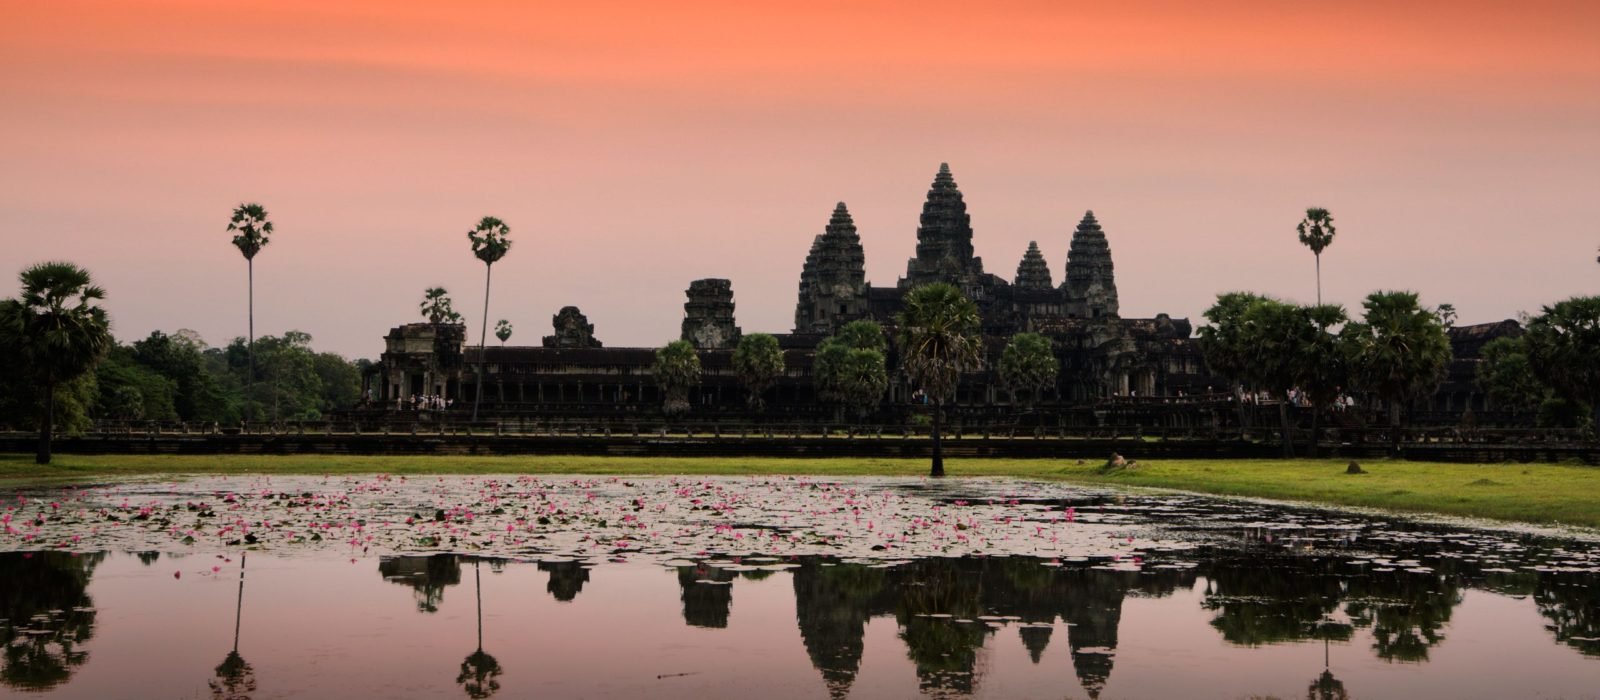 Reflection of Angkor Wat, Cambodia, in the red and pink hues of sunset